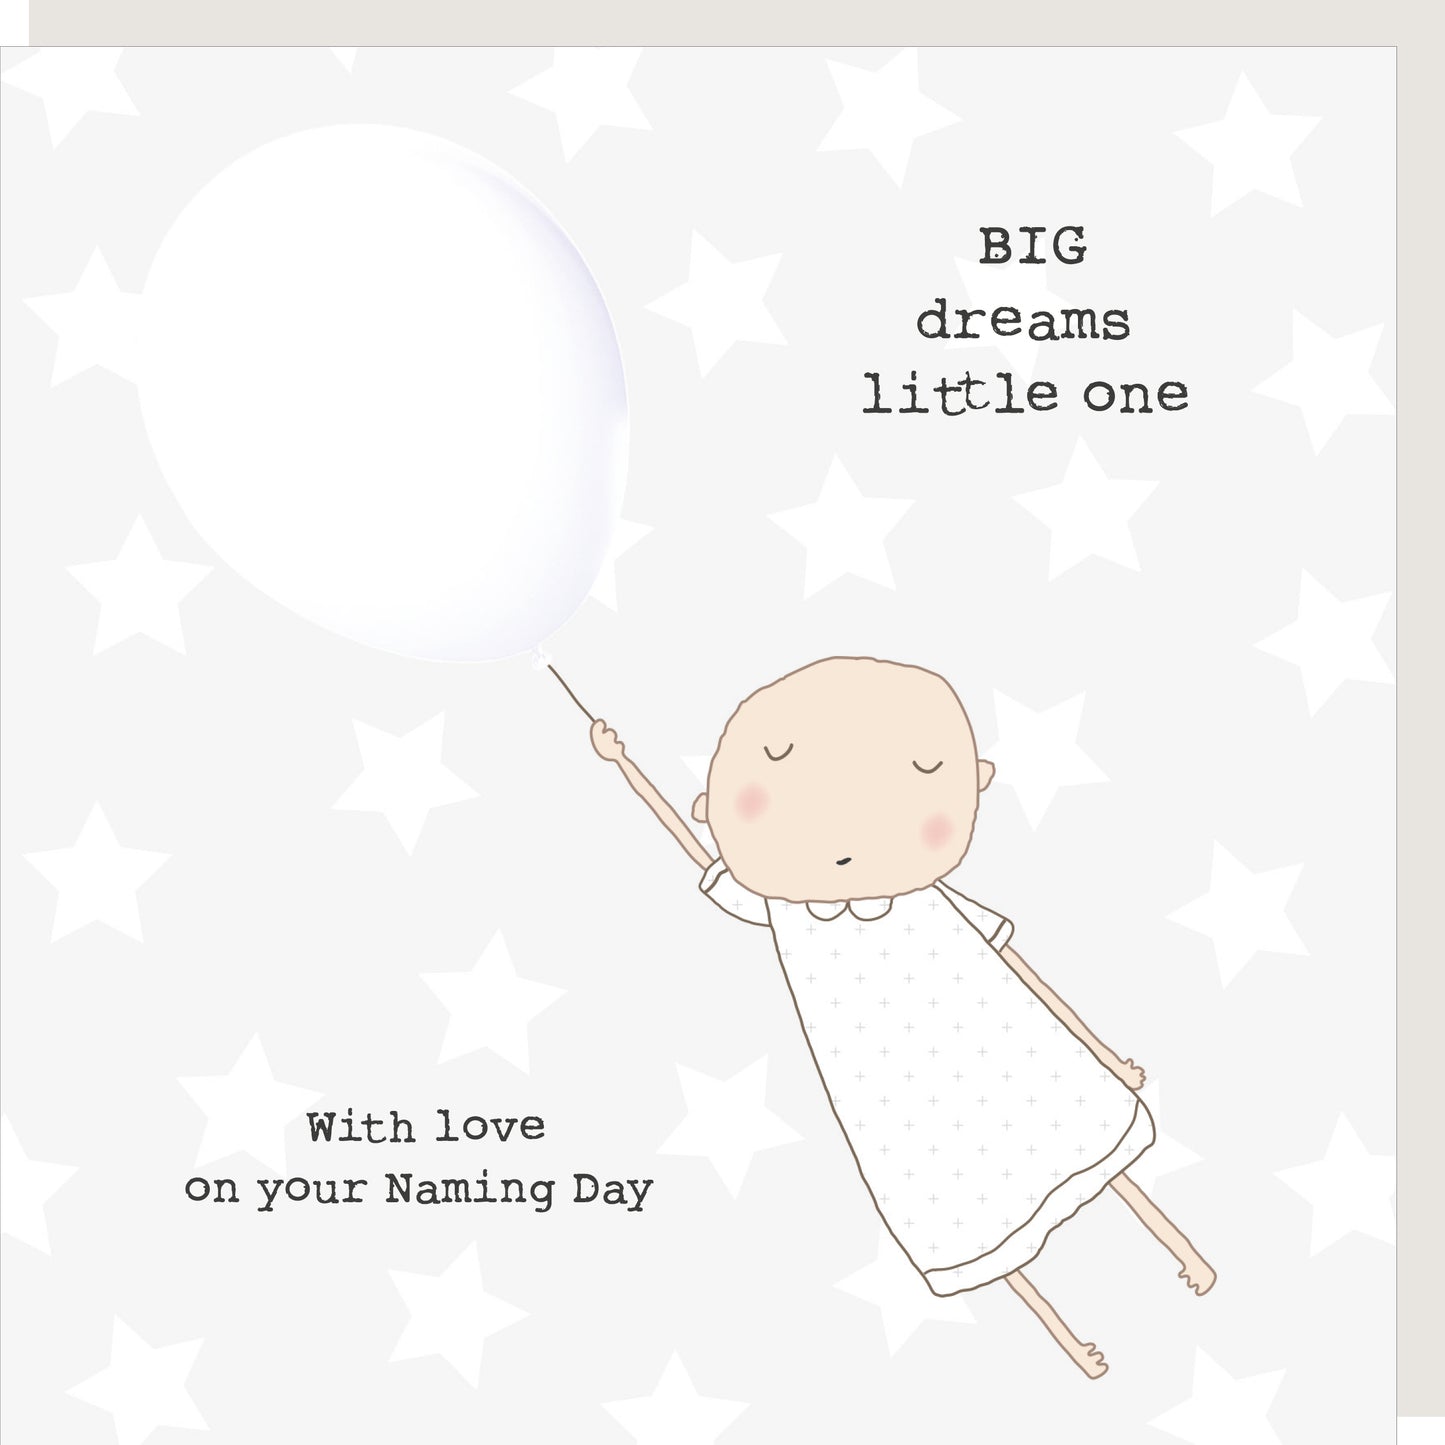 Rosie Made A Thing Big Dreams Little One Naming Day Greeting Card